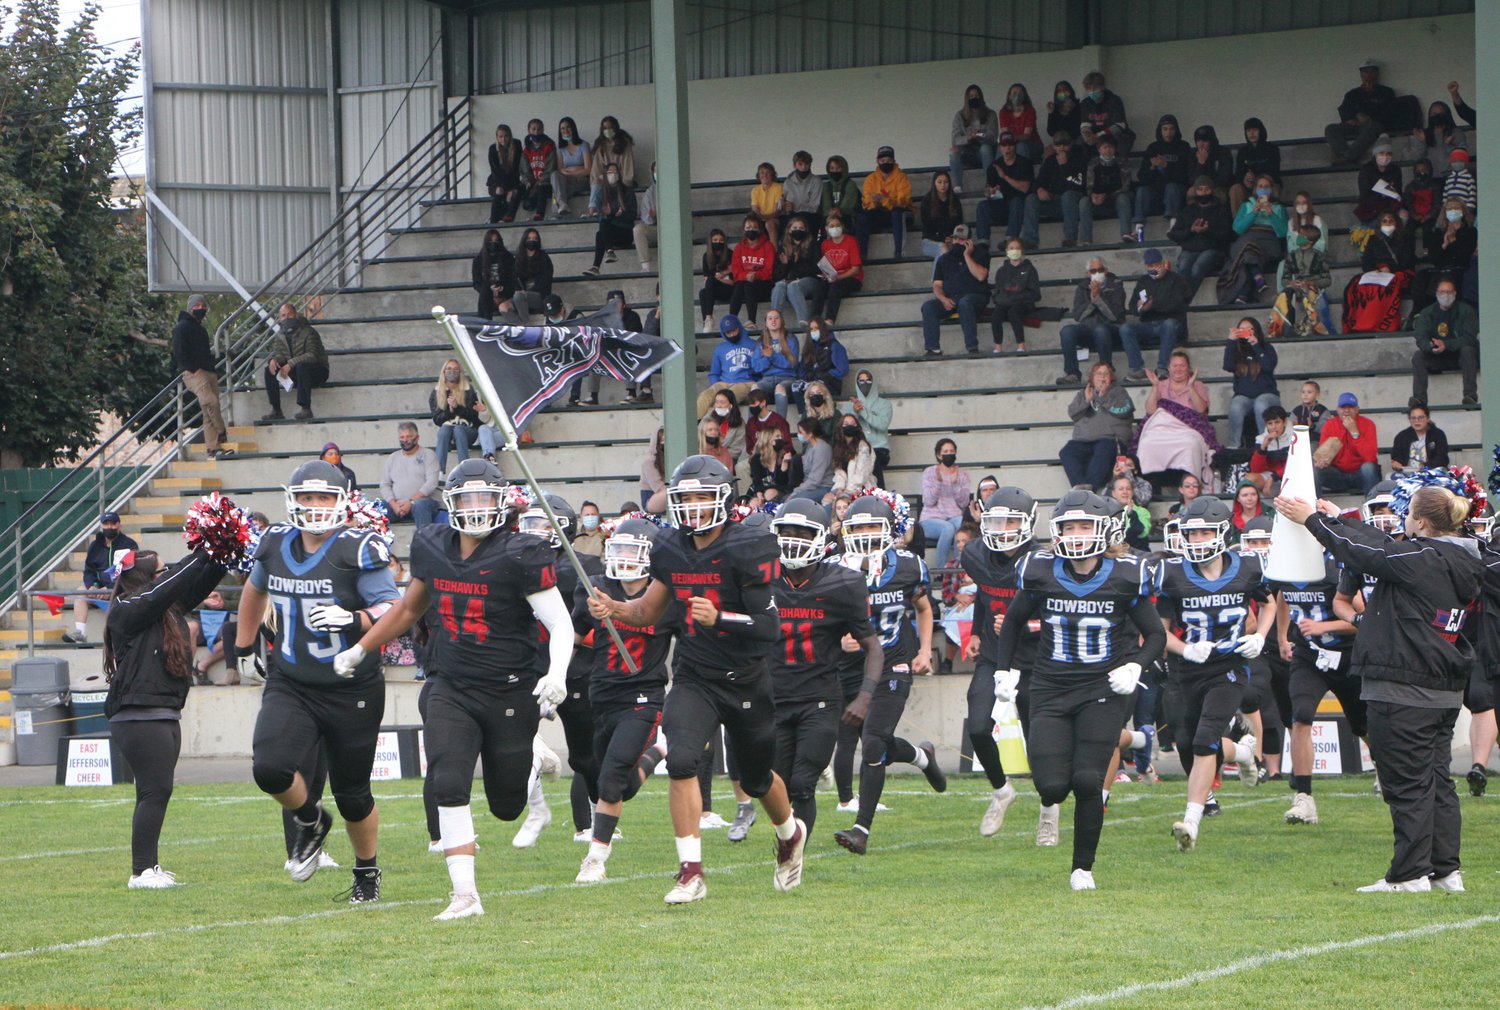 East Jefferson Rivals football players rush onto the field prior to their season opener game versus Granite Falls High School in September 2021.